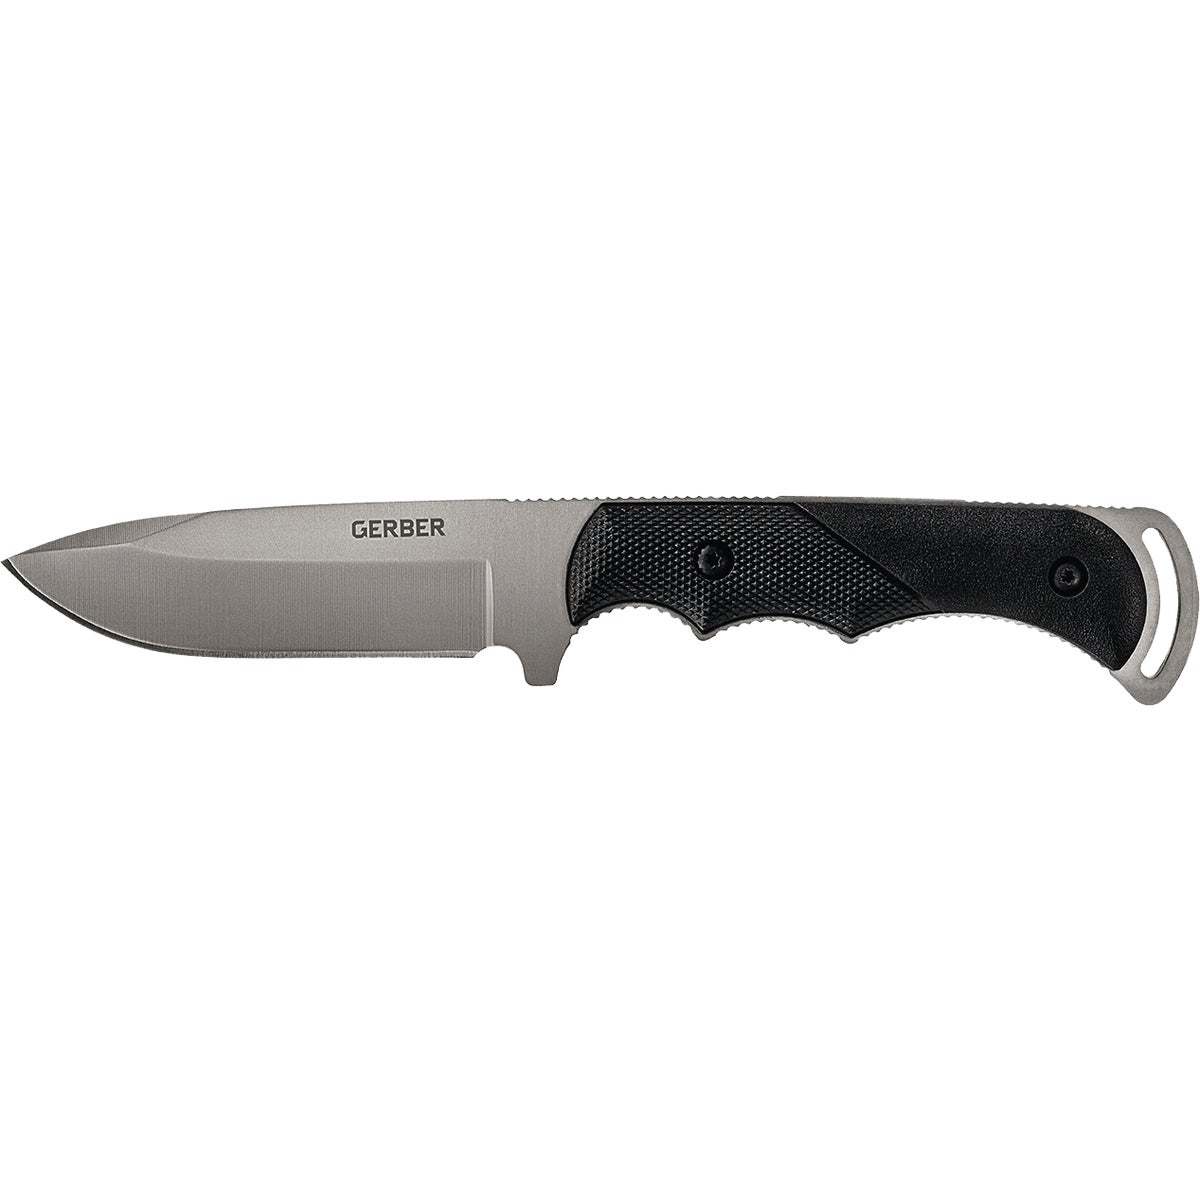 Gerber Freeman Guide 4 In. Stainless Steel Fixed Blade Knife